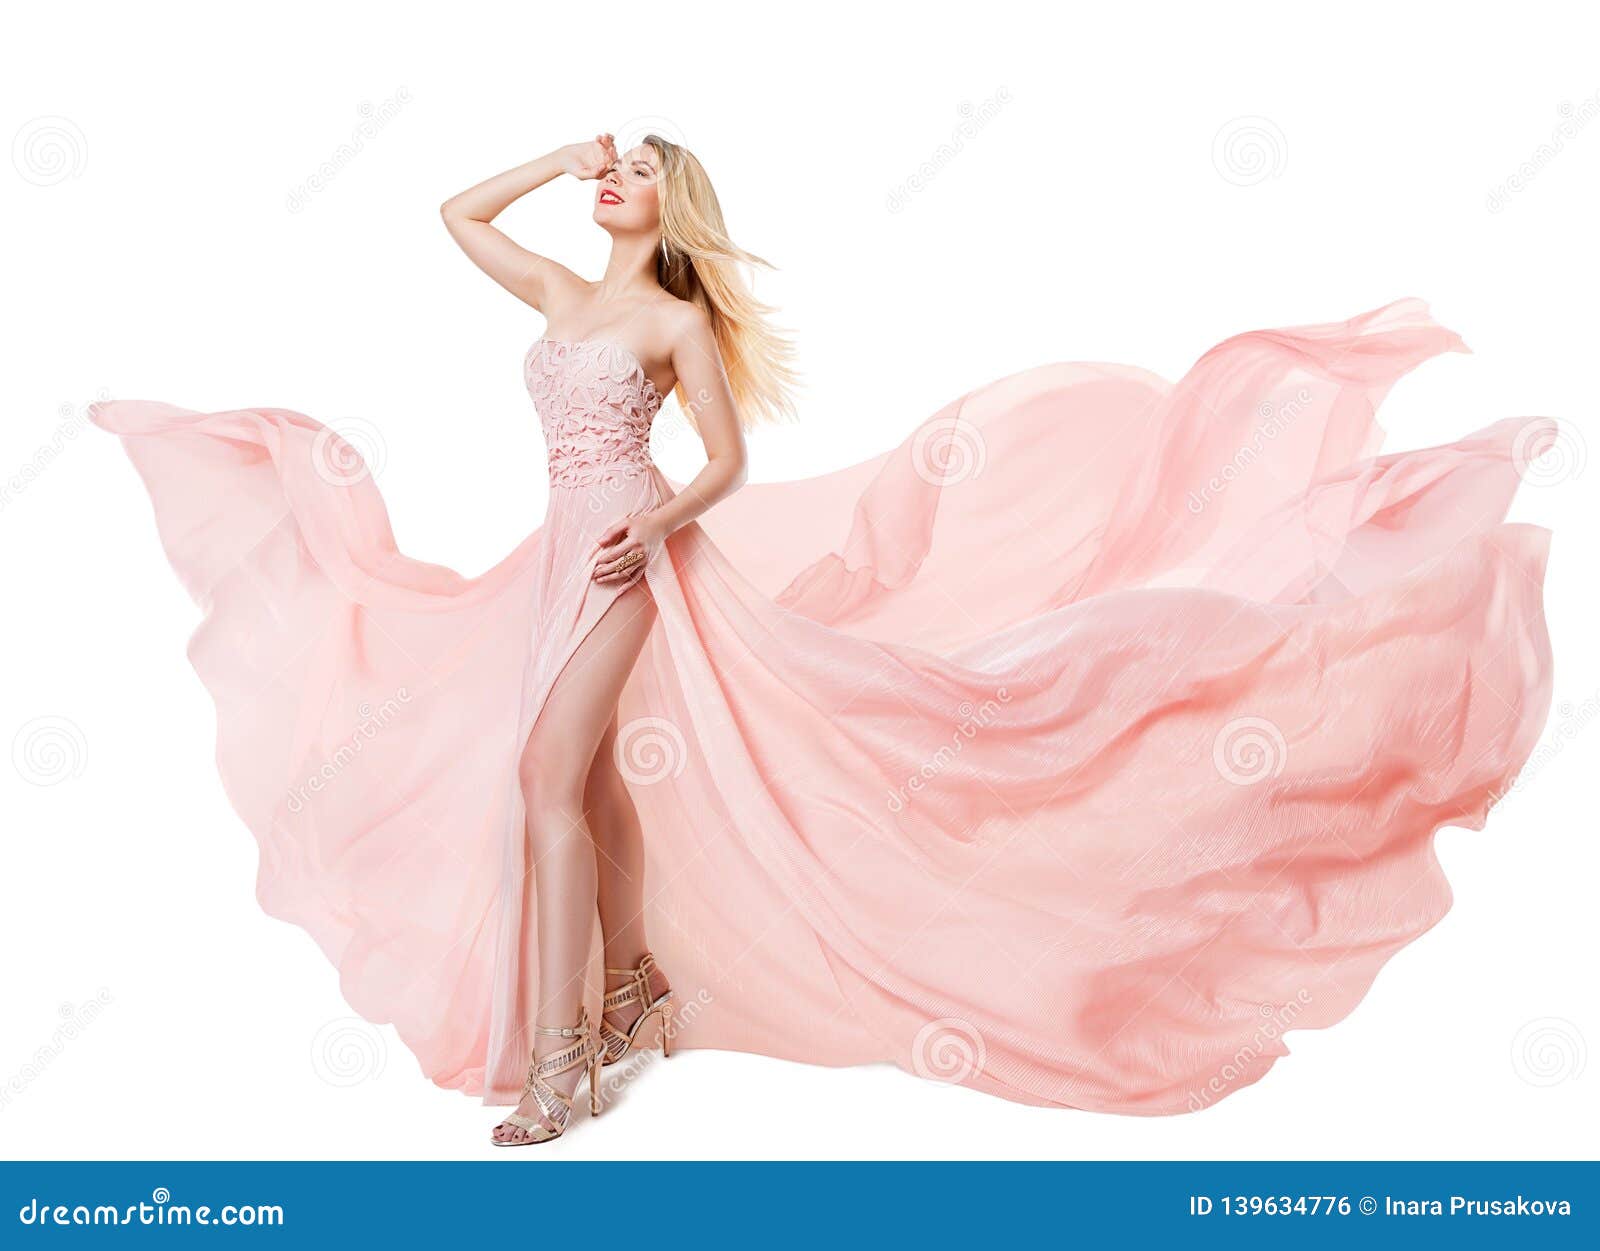 woman flying pink dress, fashion model in long waving gown, fluttering fabric